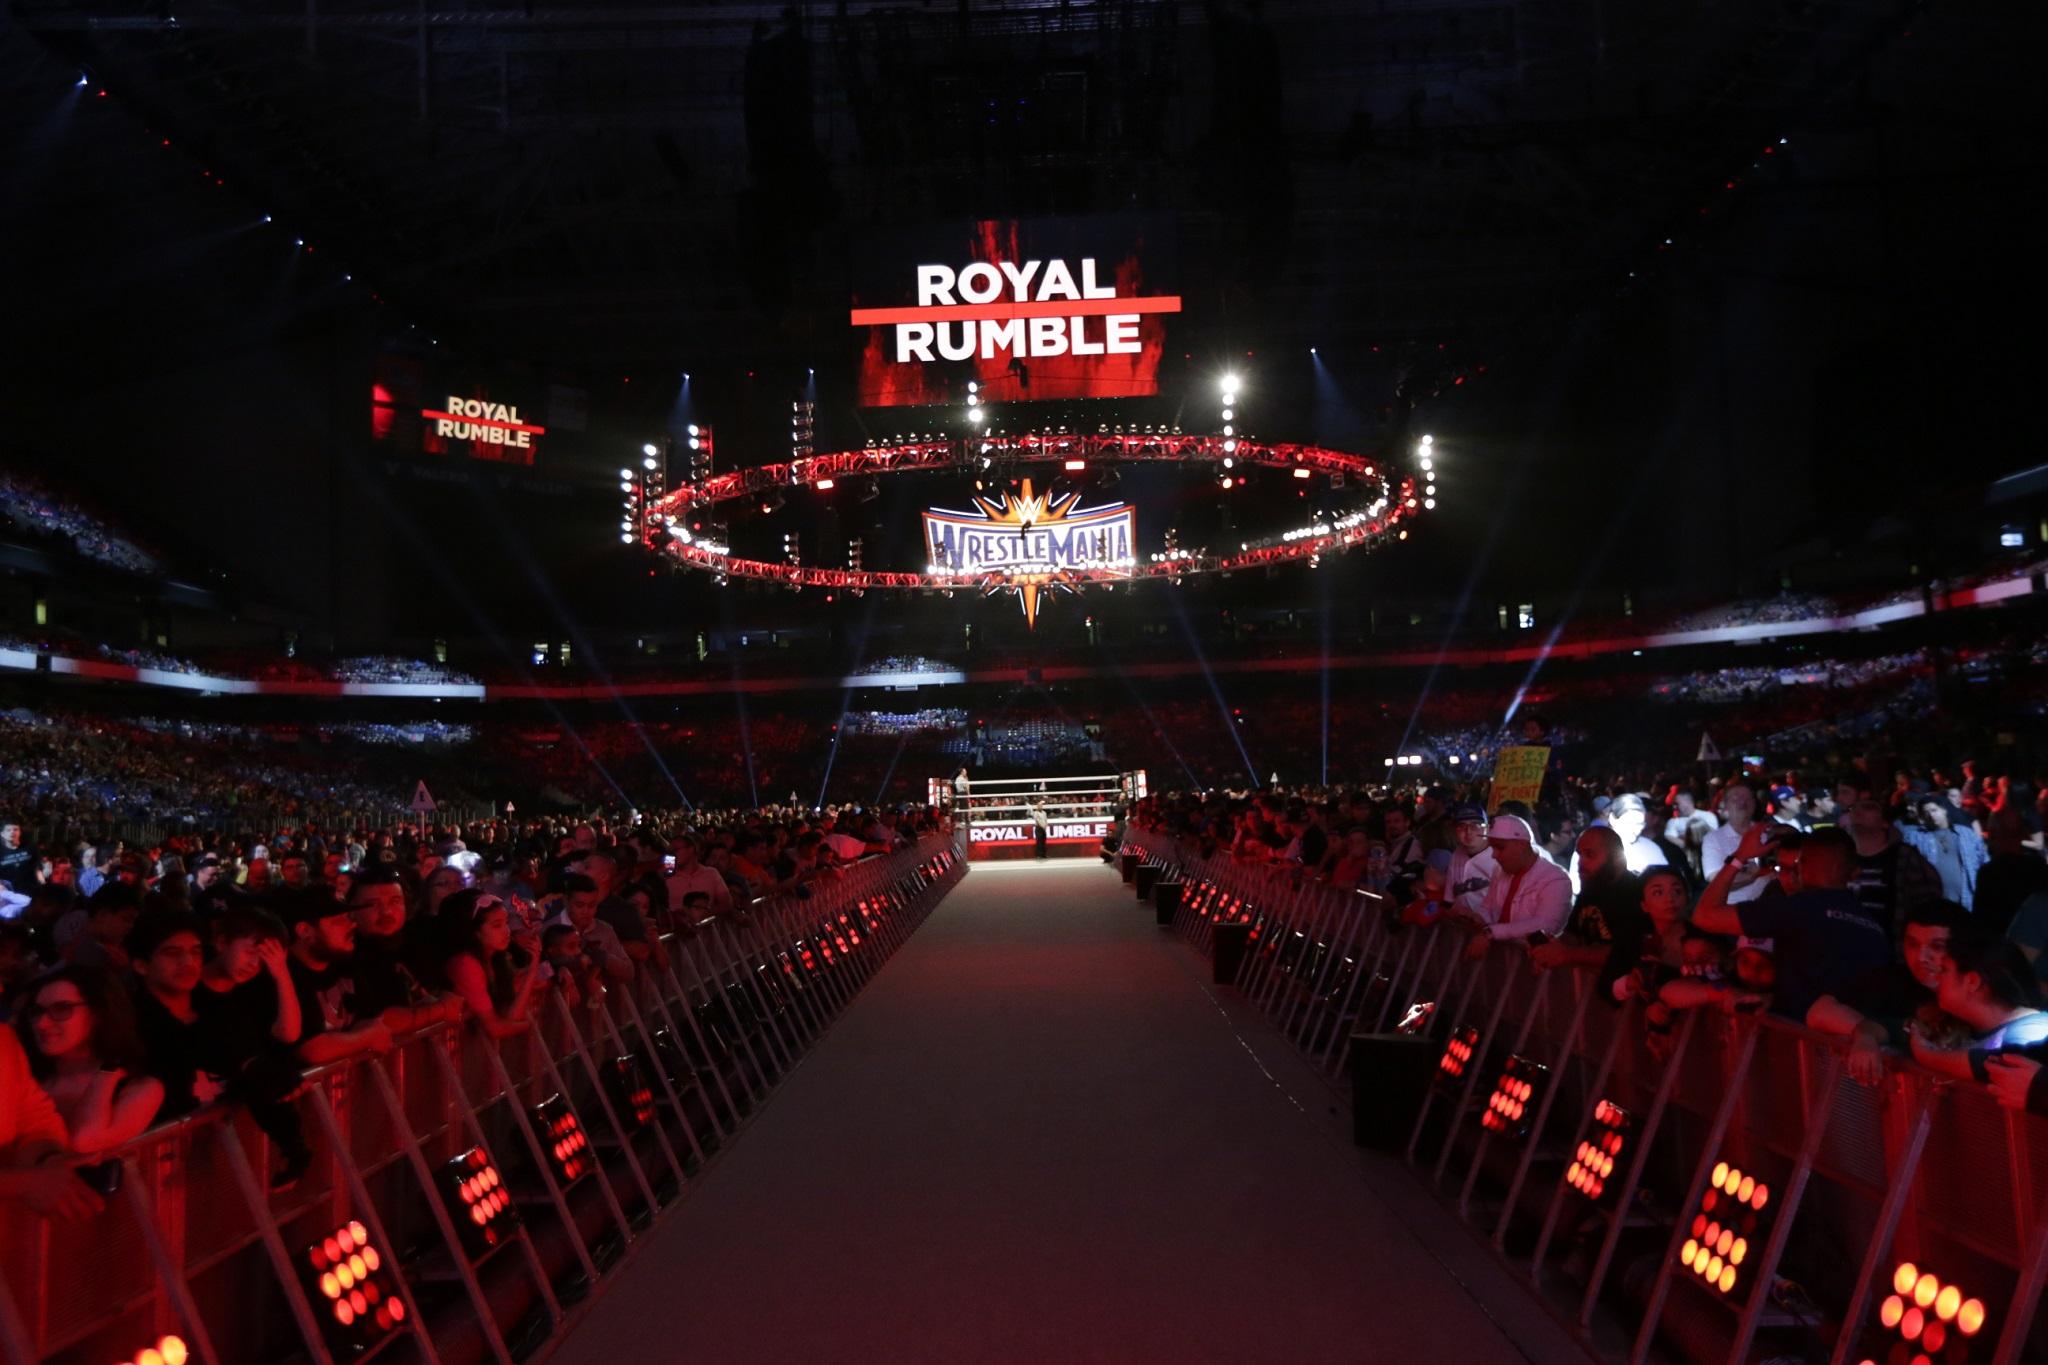 The Greatest Royal Rumble is a take on one of the WWE's flagship events